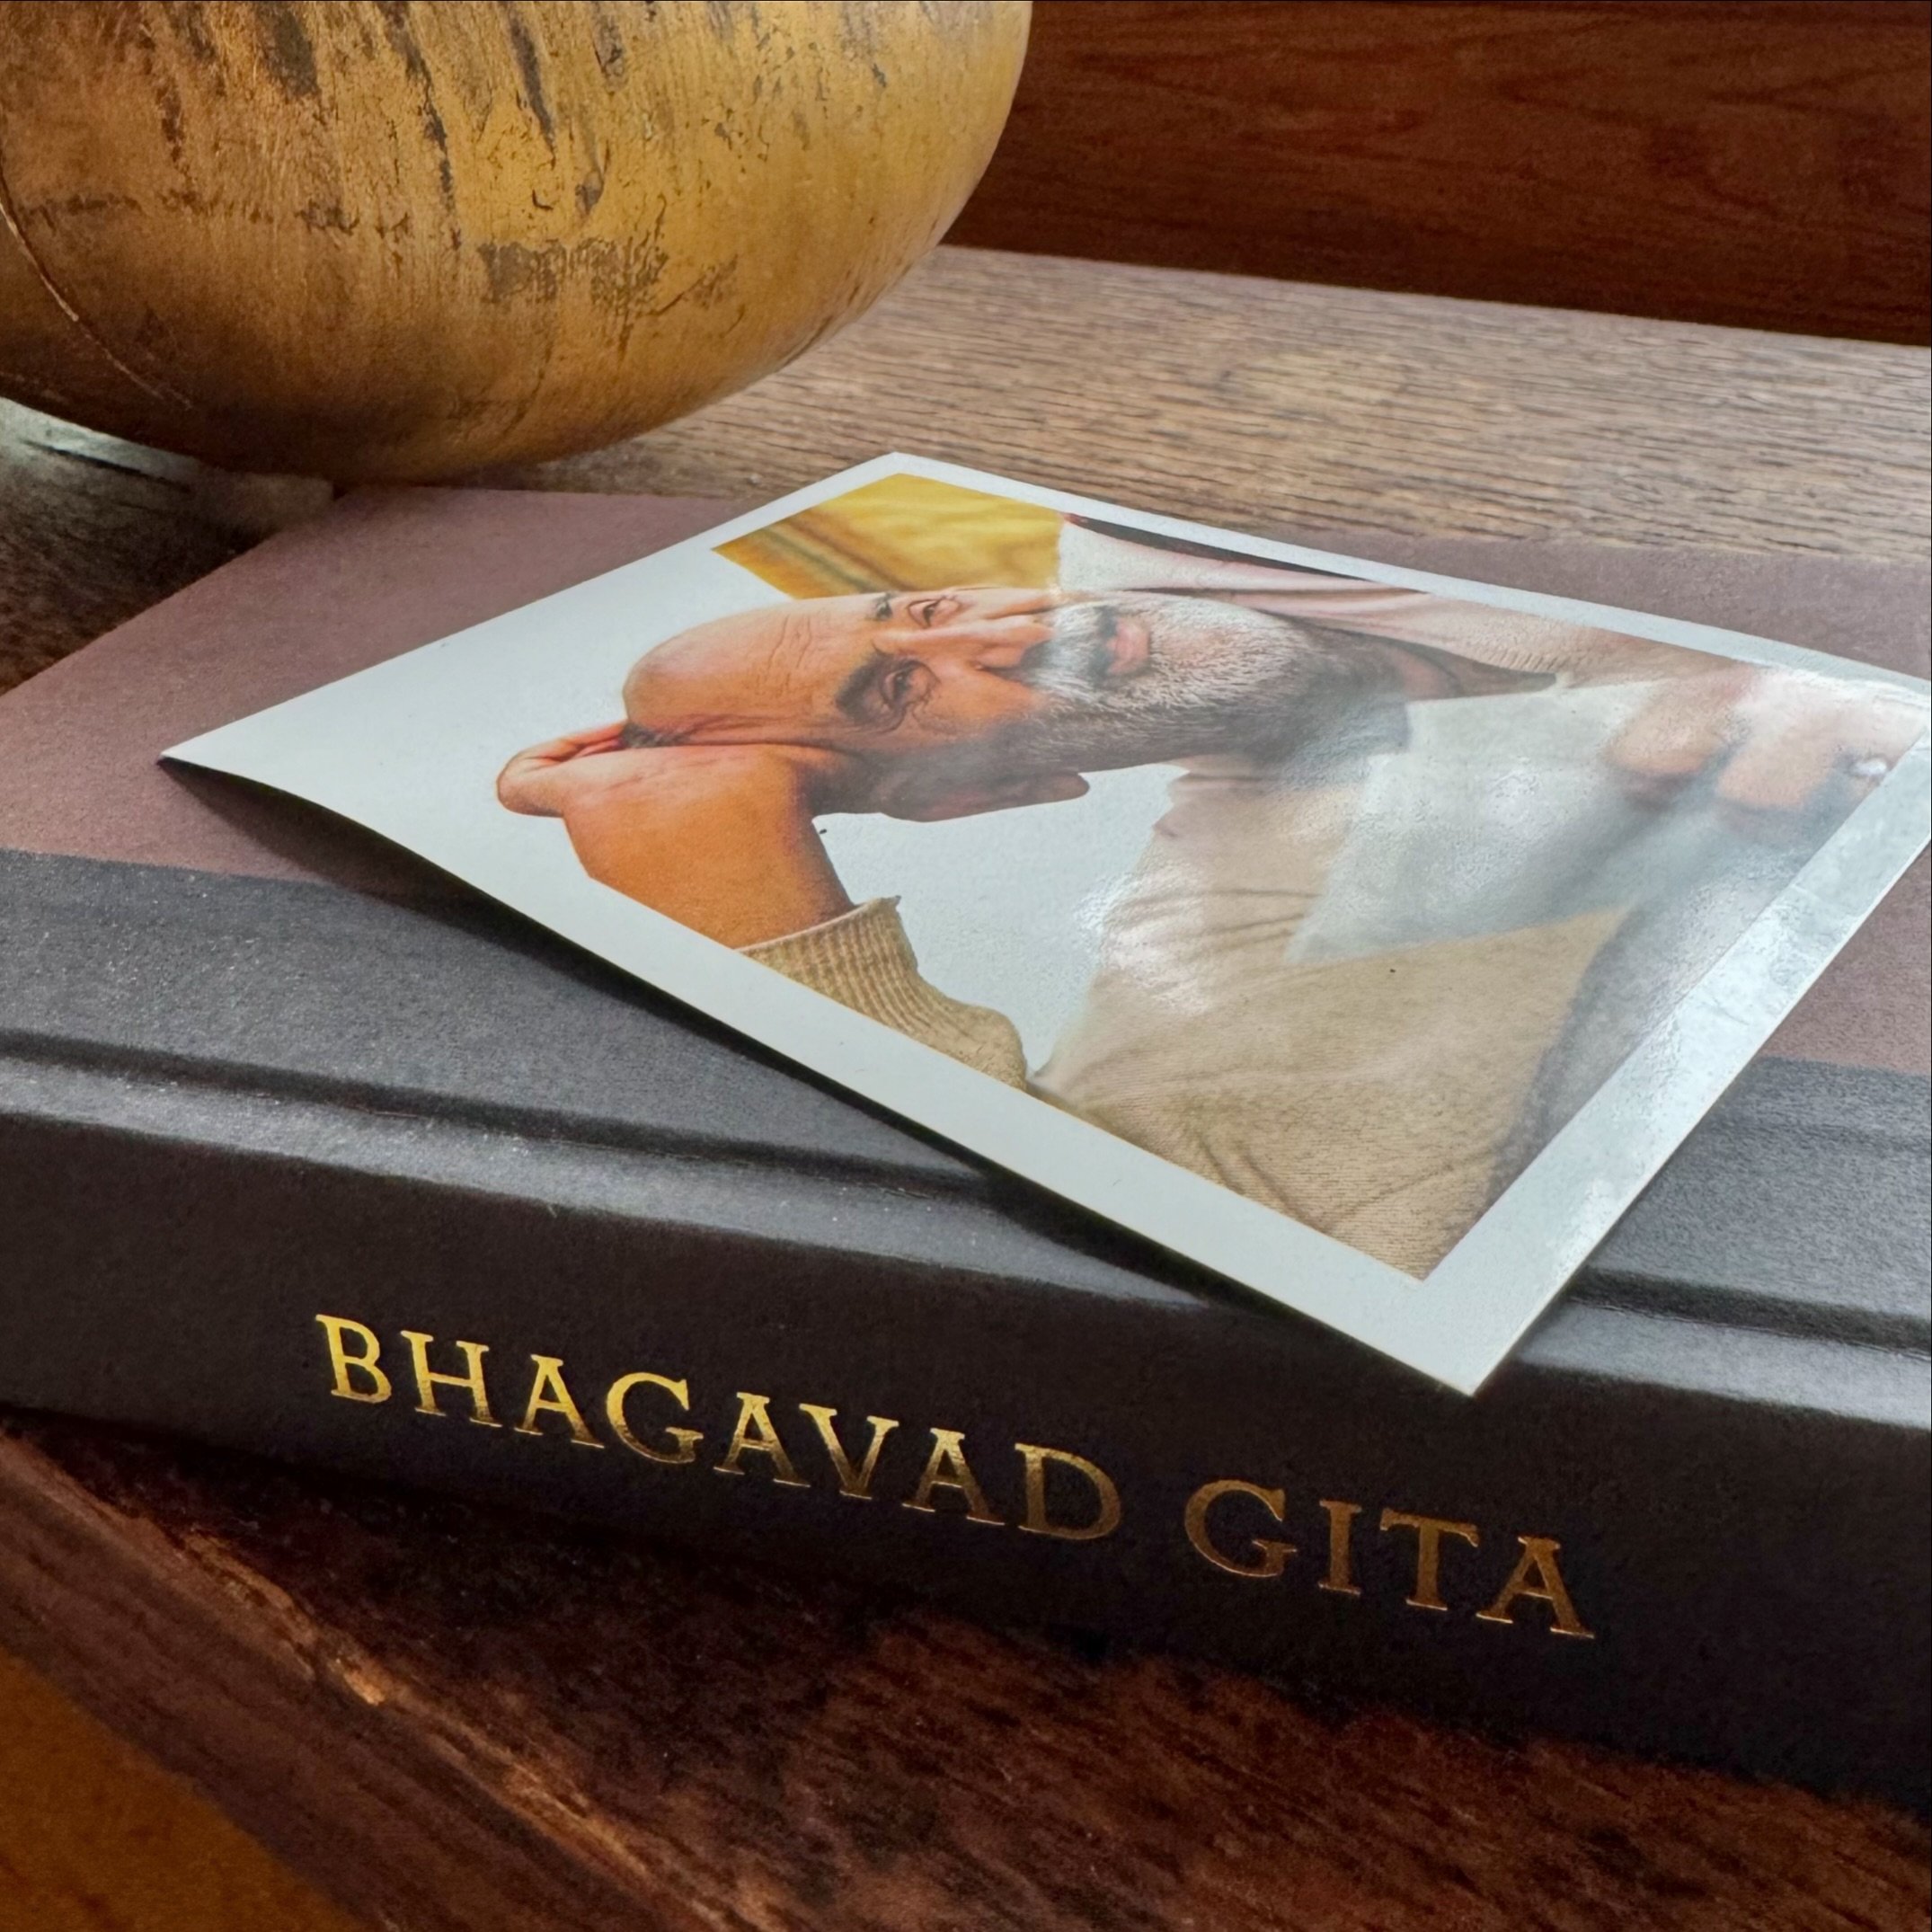 Starts THIS Tuesday, April 23rd! Join me for a 4-part online course about the Bhagavad Gītā! An ancient yogic text packed with teachings to deepen your understanding of yourself, stoke a spiritual connection, and transform the way you relate to the w